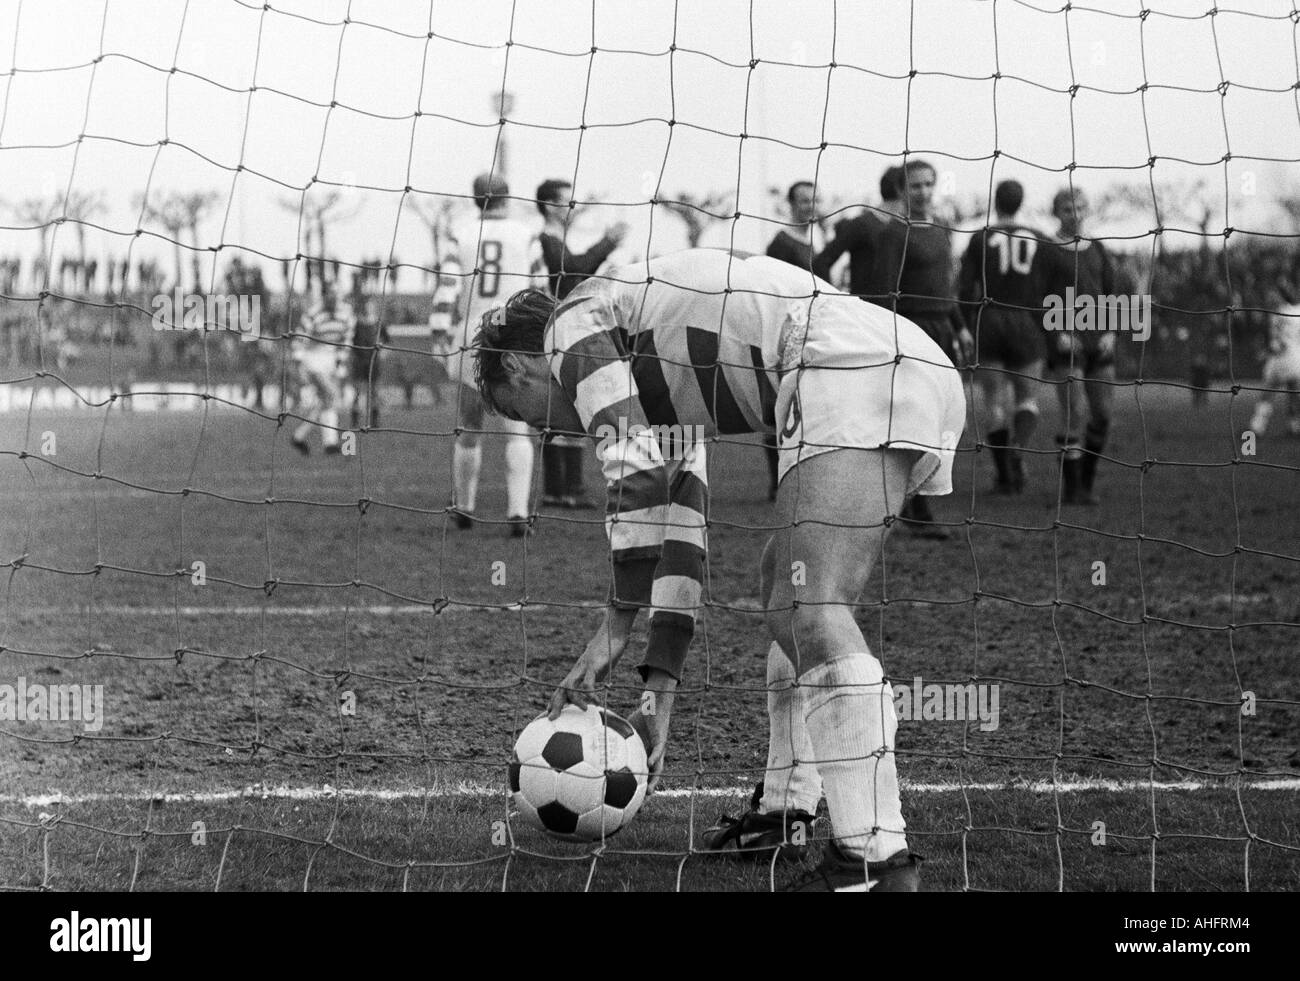 football, Bundesliga, 1967/1968, Wedau Stadium in Duisburg, MSV Duisburg versus 1. FC Kaiserslautern 7:0, scene of the match, 7:0 free-kick goal to MSV by Horst Wild (not pictured), Rainer Budde (MSV) fetches the ball out of the net Stock Photo